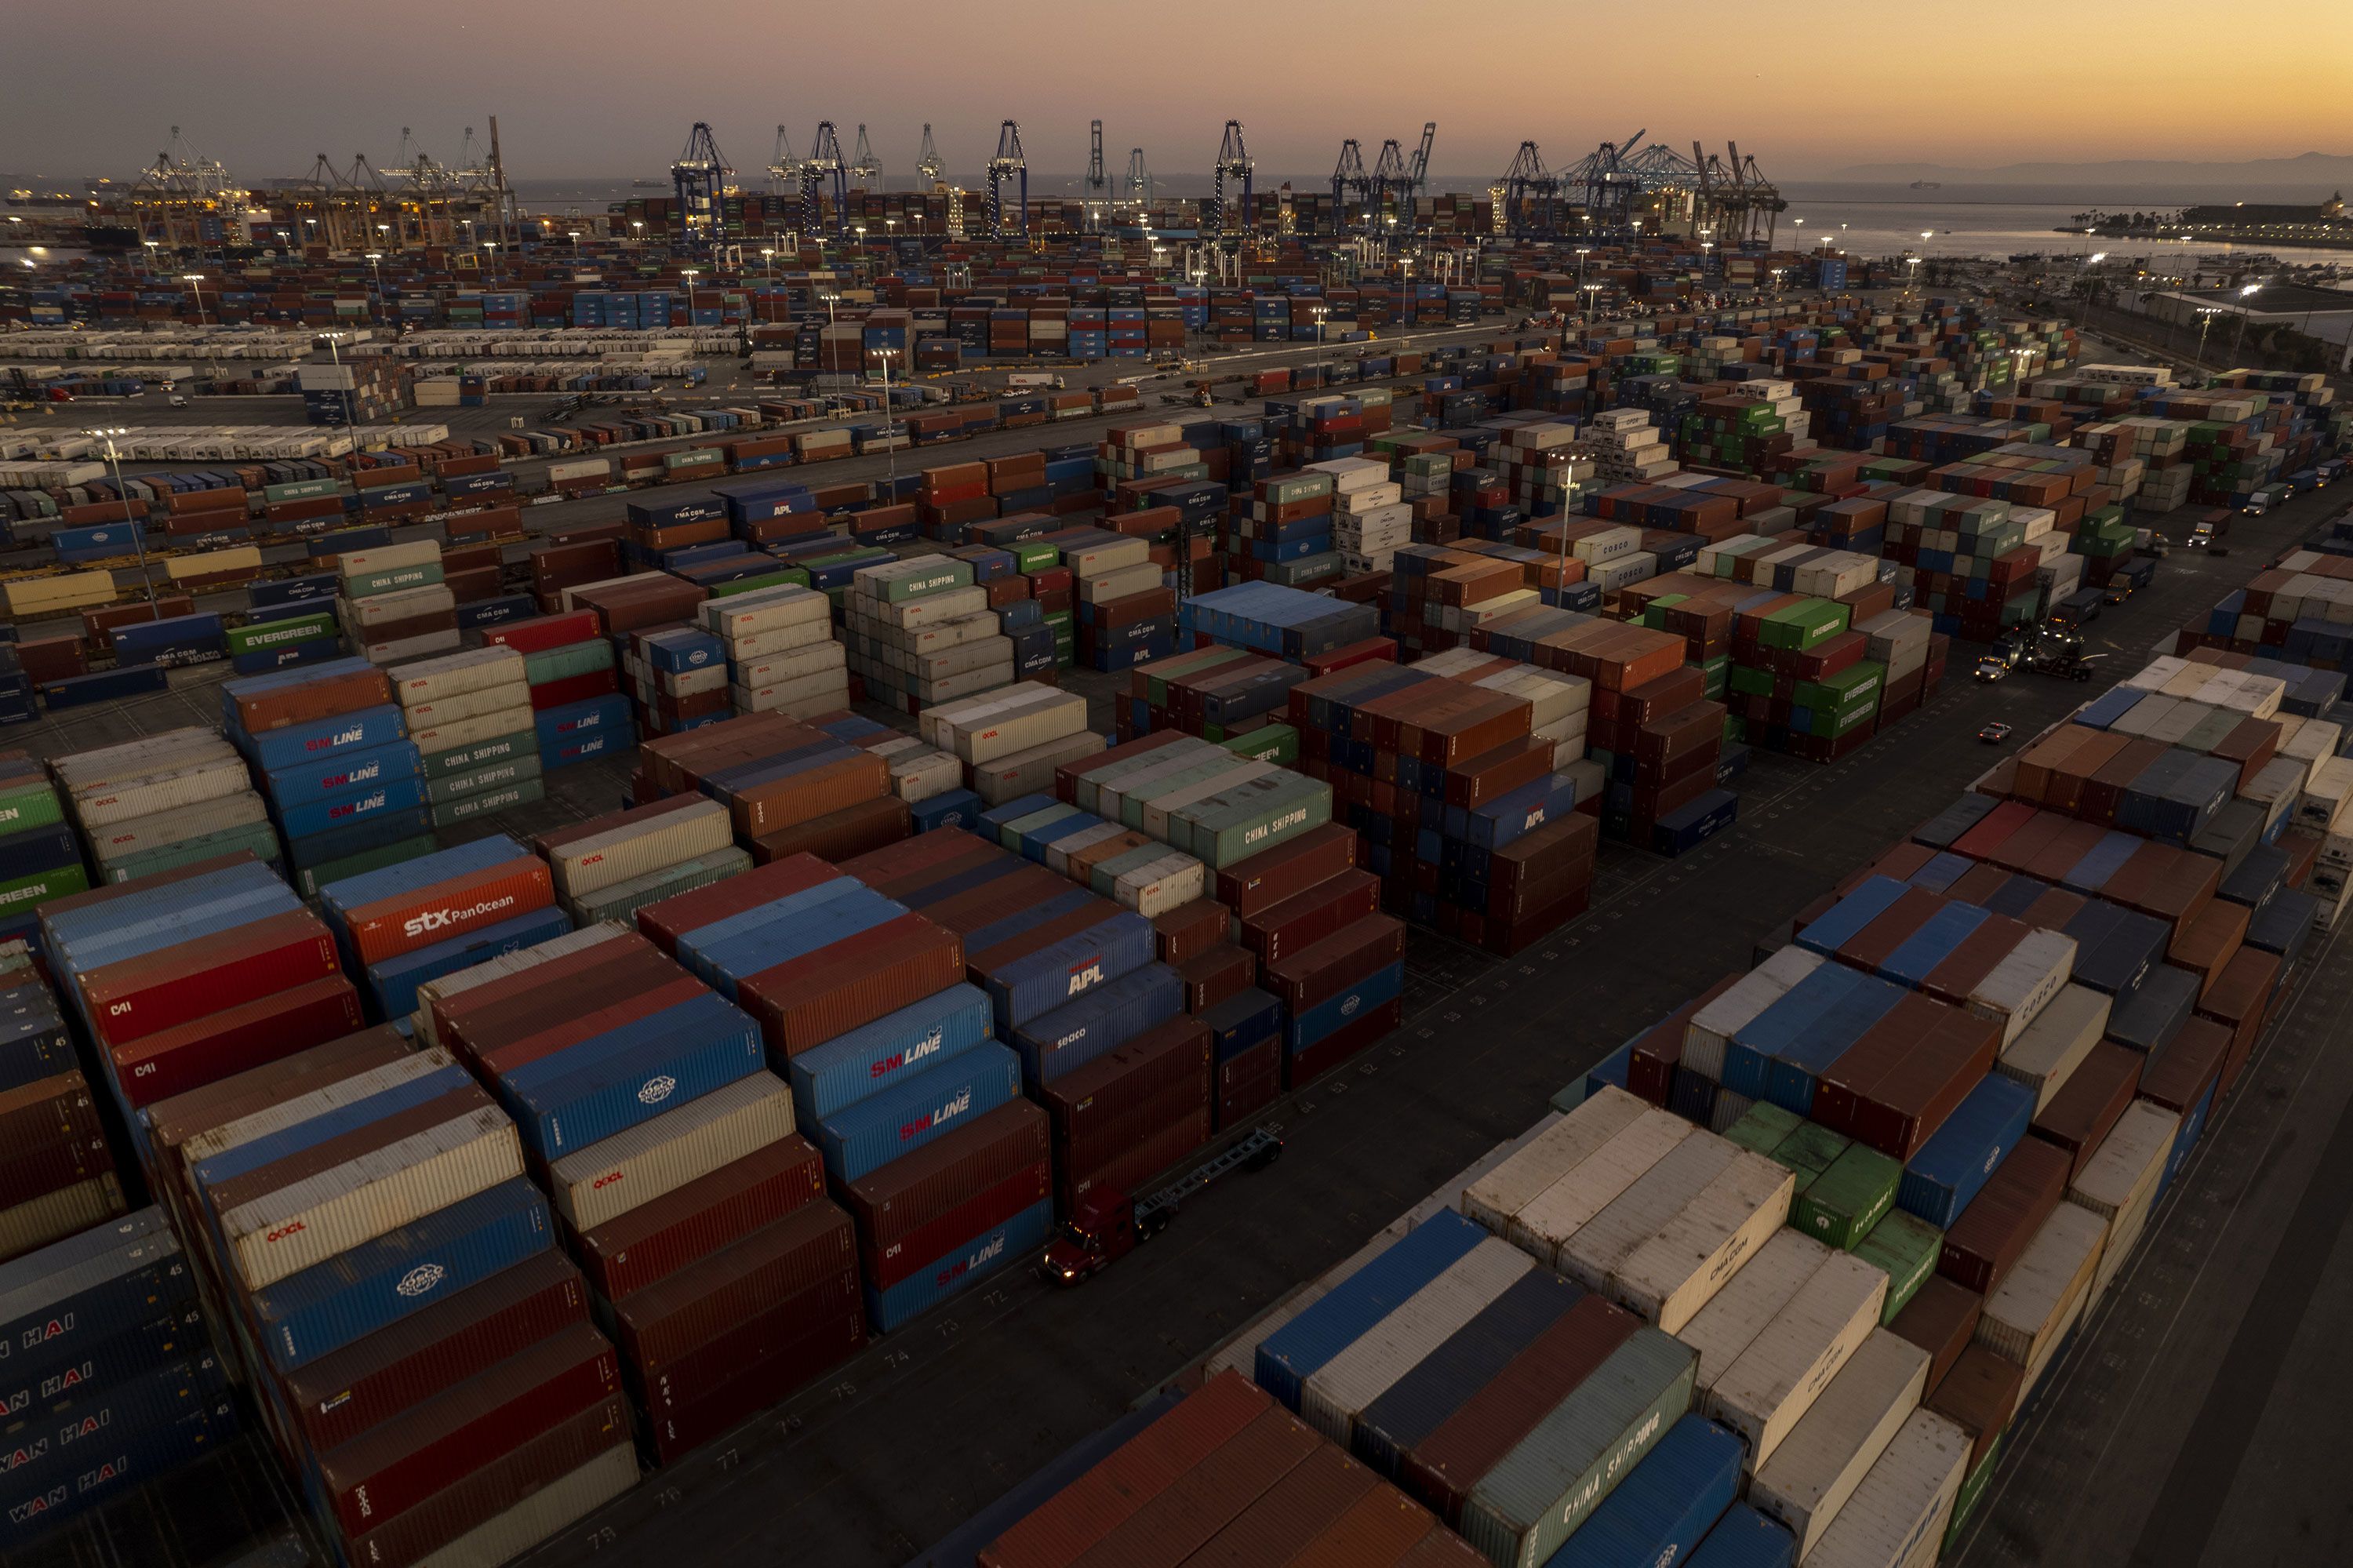 Shipping containers in the Port of Los Angeles are stacked high on October 13.